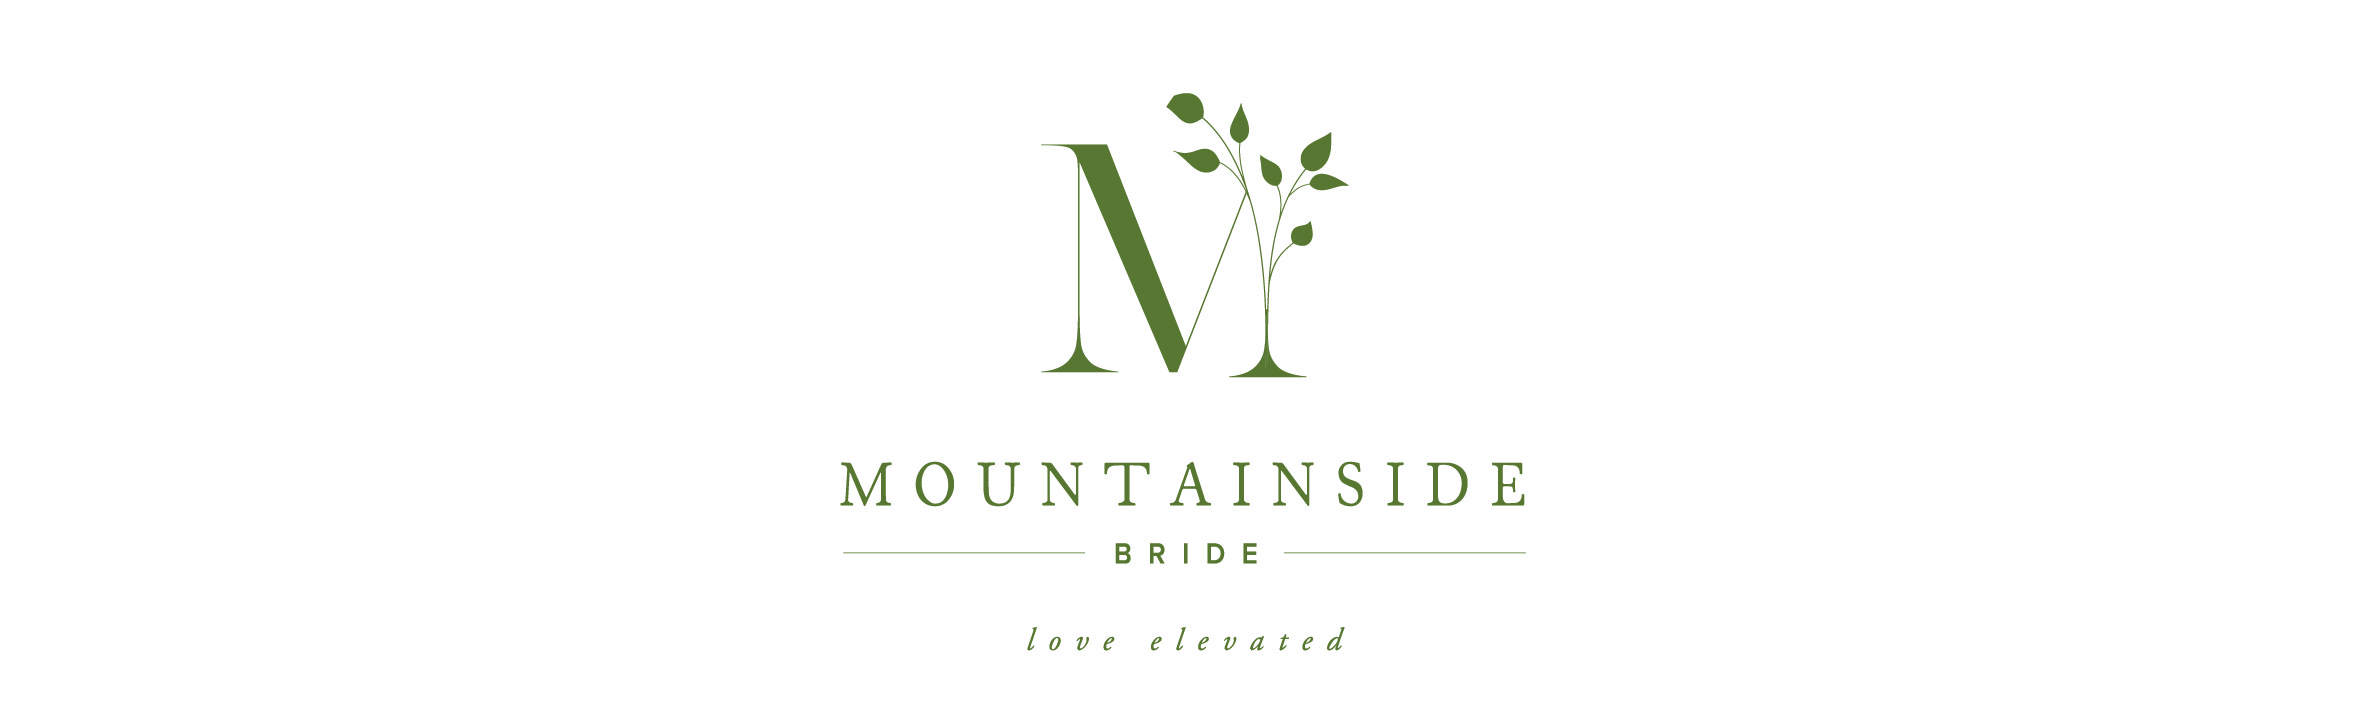 Mountainside Bride Pier 9 Design Graphic Design And Stationery